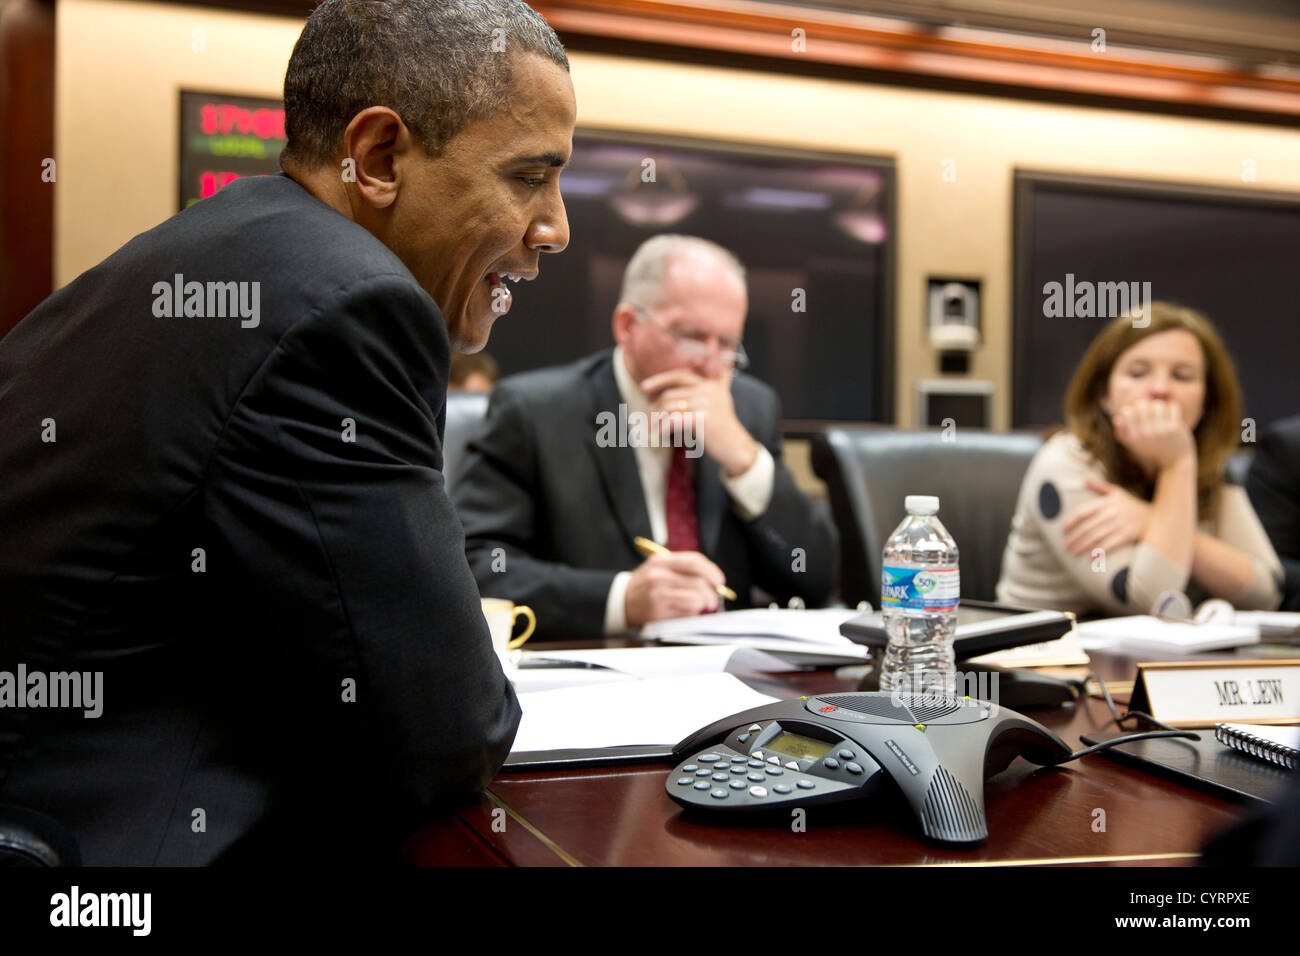 US President Barack Obama participates in a conference call with electric utility executives to discuss the restoration of power for those who lost electricity during Hurricane Sandy in the Situation Room of the White House October 30, 2012 in Washington, DC. John Brennan, Assistant to the President for Homeland Security and Counterterrorism, and Alyssa Mastromonaco, Deputy Chief of Staff for Ops, listen at right. Stock Photo